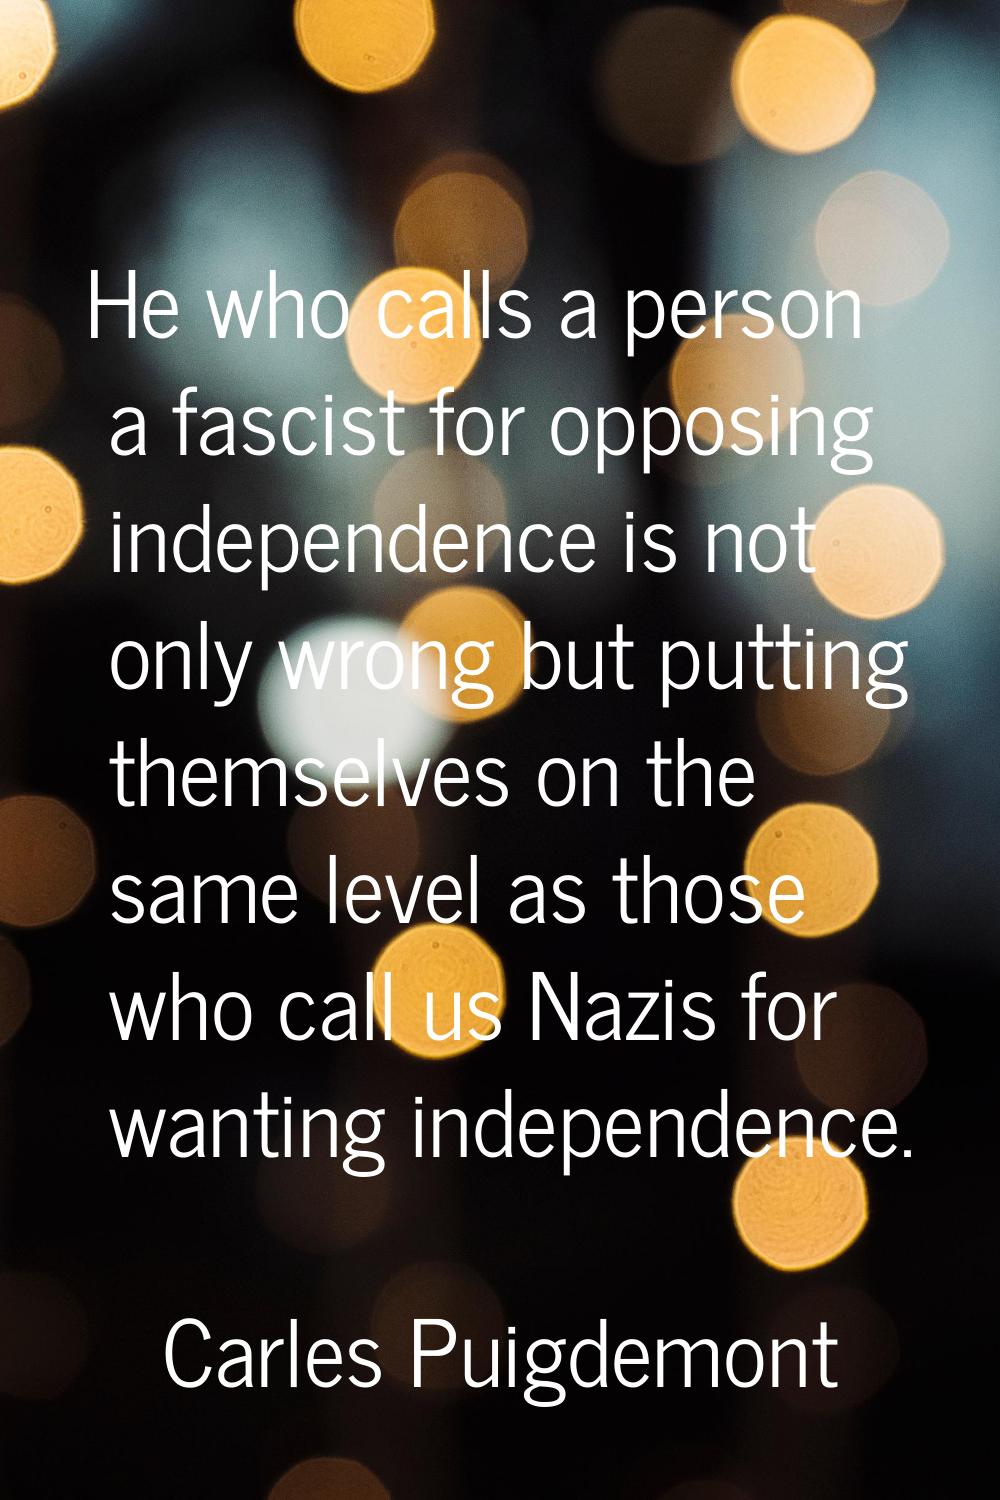 He who calls a person a fascist for opposing independence is not only wrong but putting themselves 